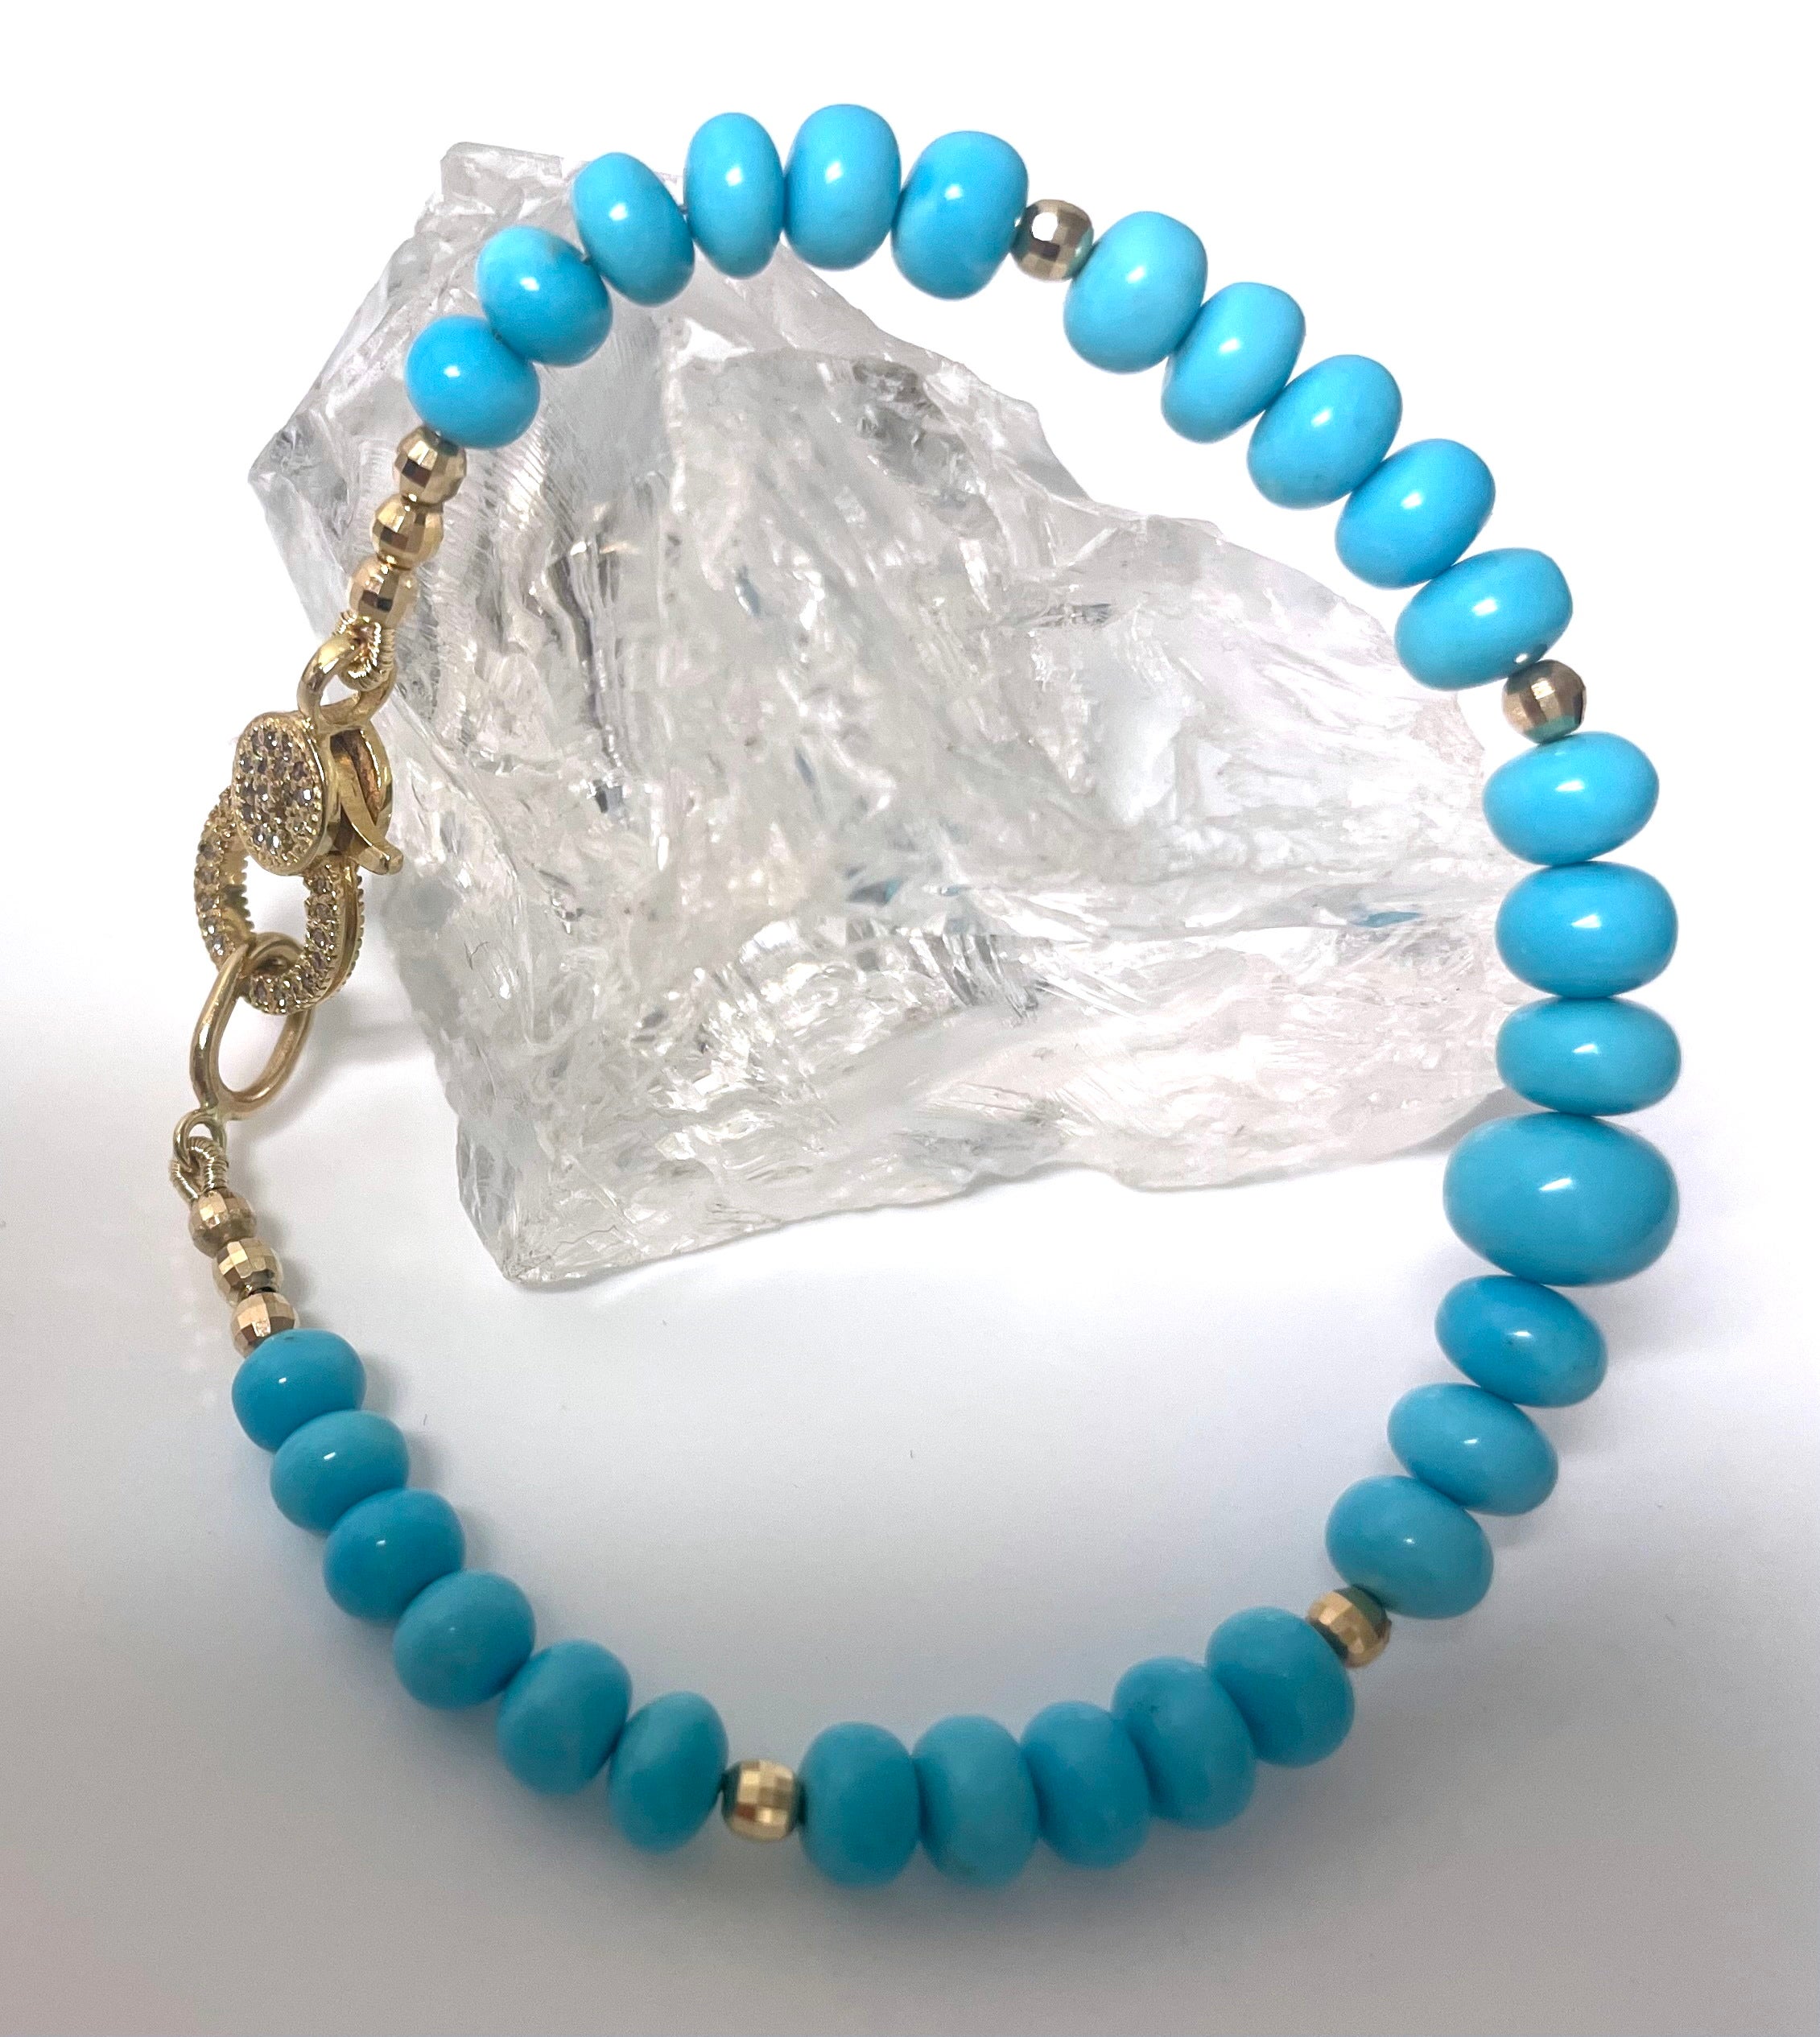 Sleeping Beauty Turquoise with Pave Diamonds Bracelet For Sale 2